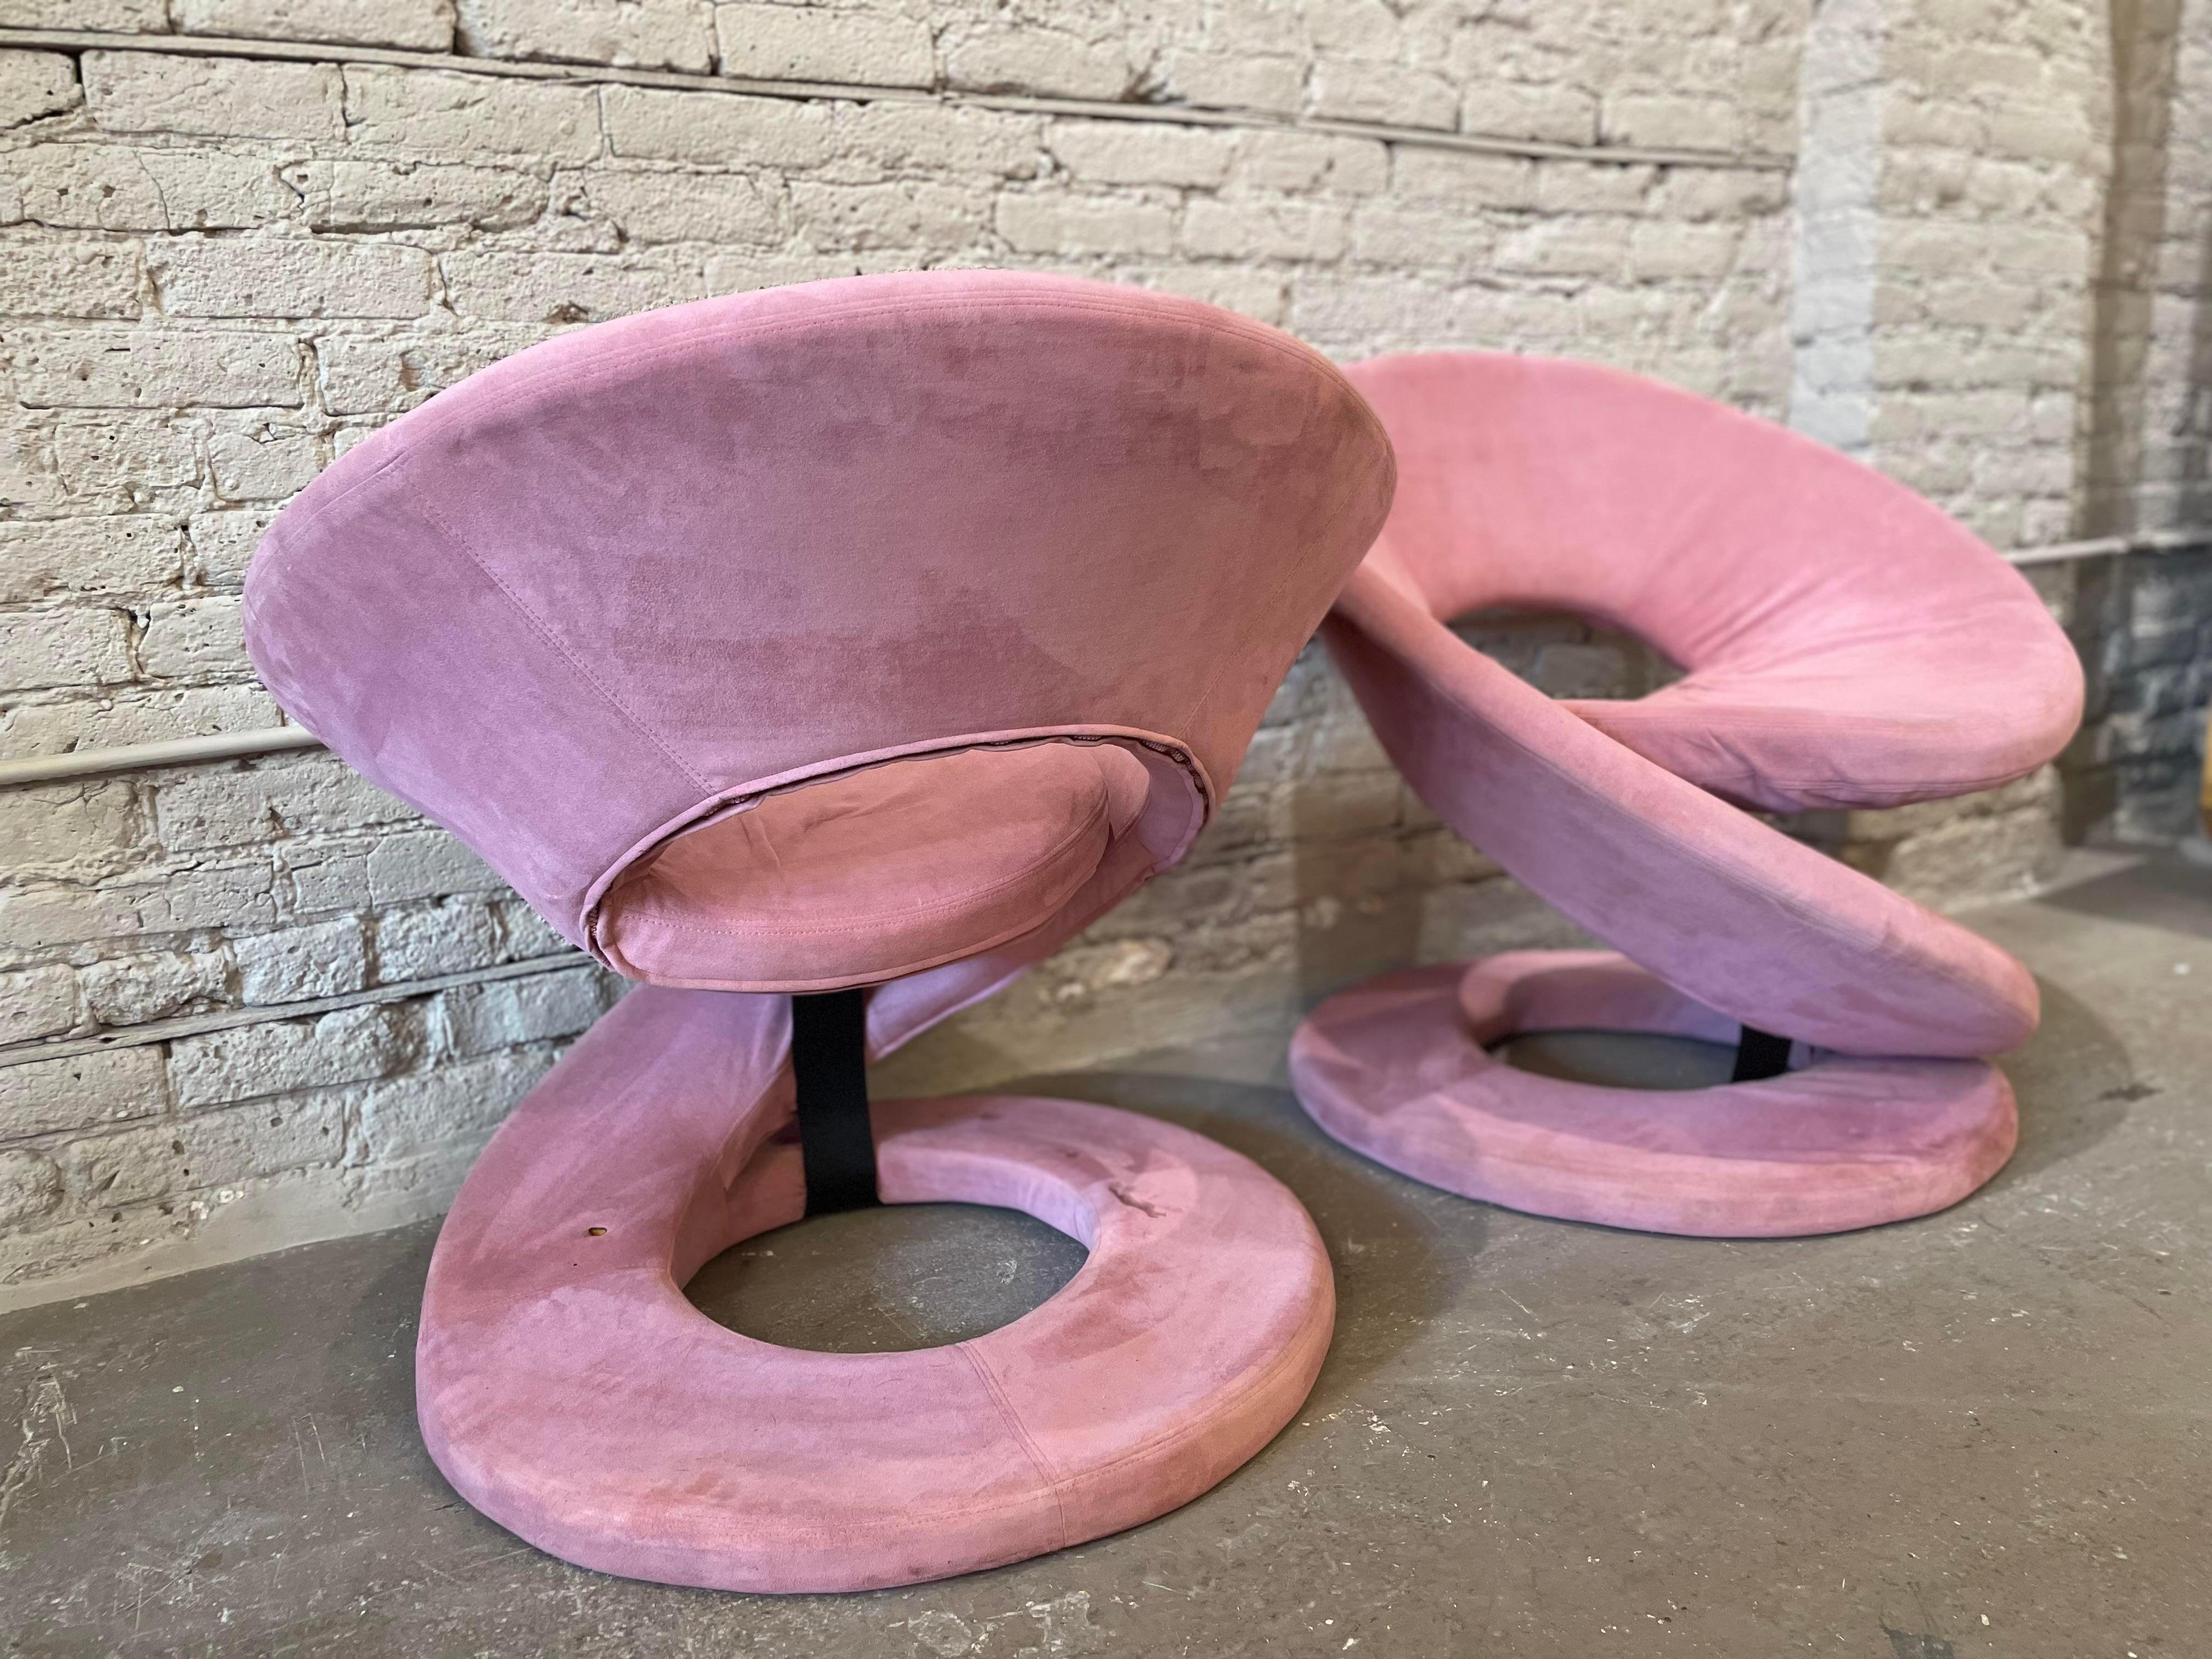 Late 20th Century 1980s Postmodern Corkscrew Chairs Attributed to Quebec 69 Jaymar - a Pair For Sale